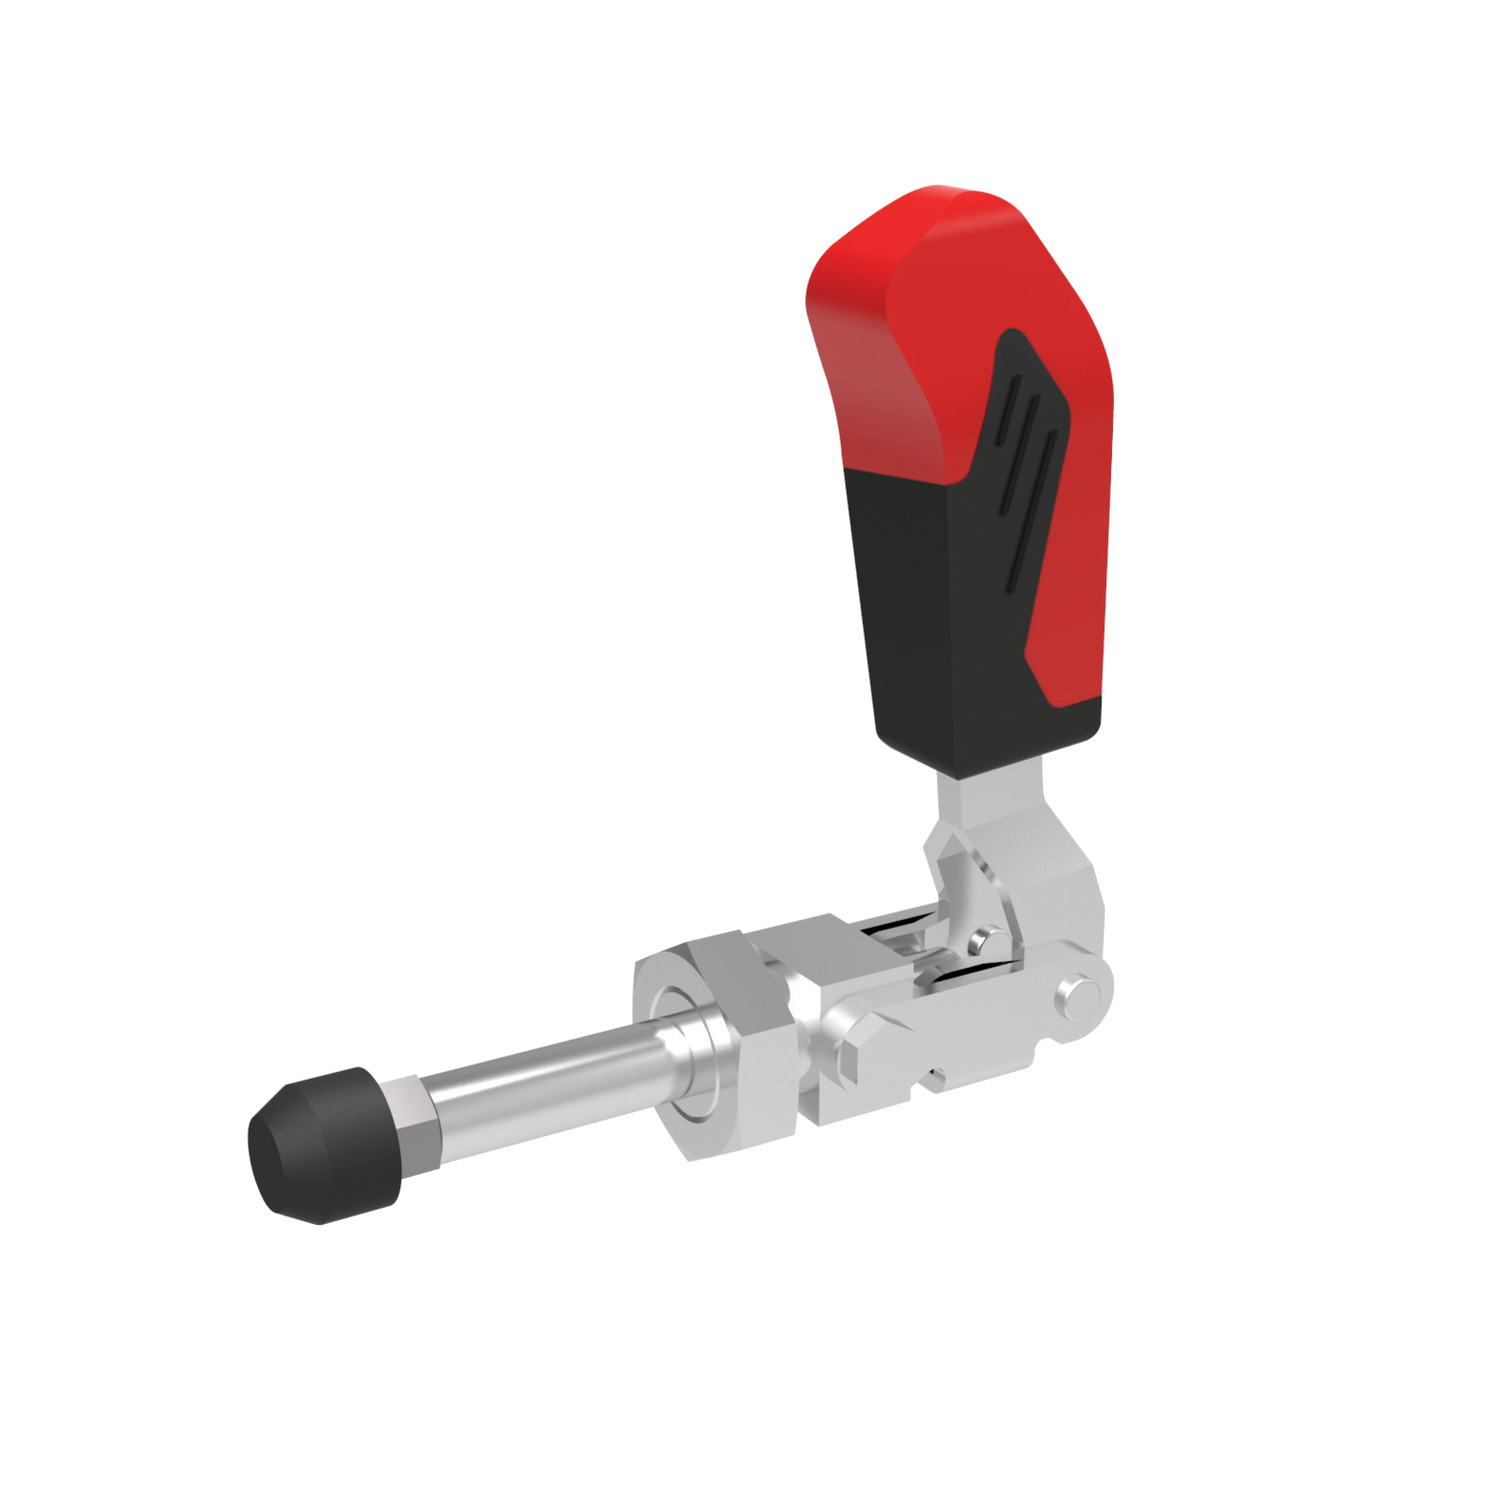 Push-Pull Toggle Clamps Short form push pull toggle clamps with ergonomic and oil resistant handles. Body of clamp is made from zinc plated and passivated steel.